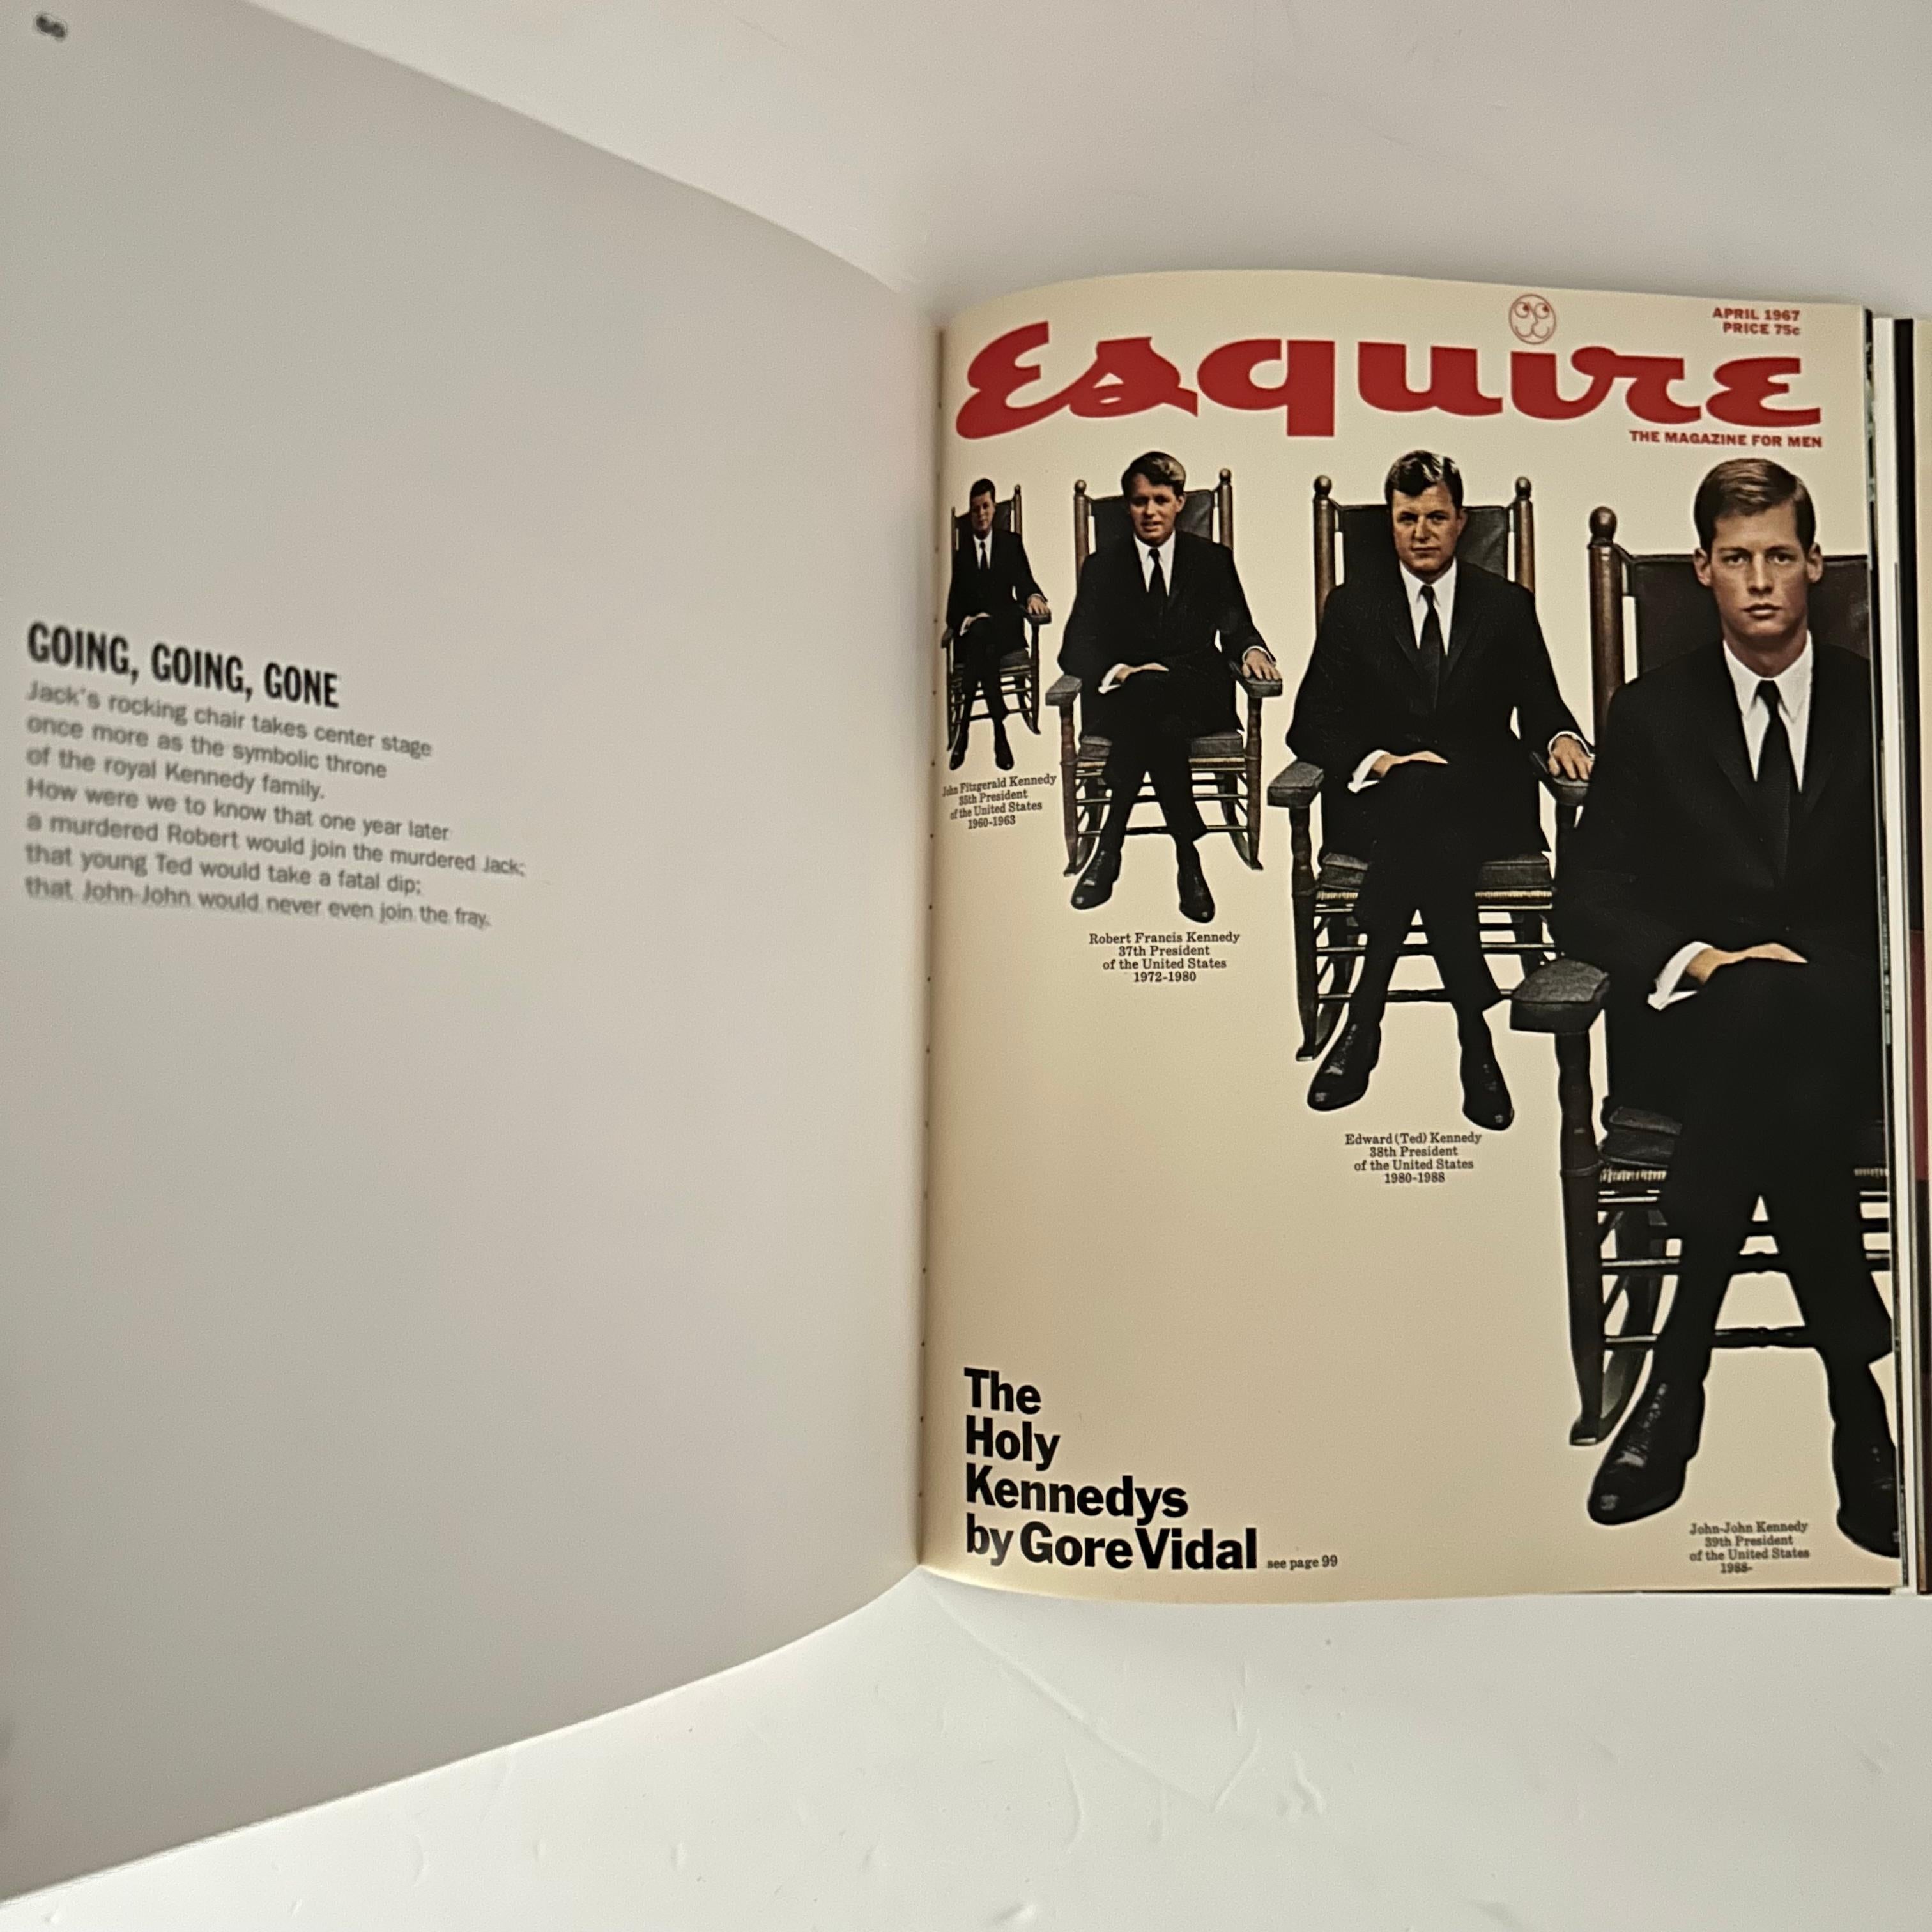 Covering the '60s: George Lois, The Esquire Era - 1st edition, New York, 1996 1